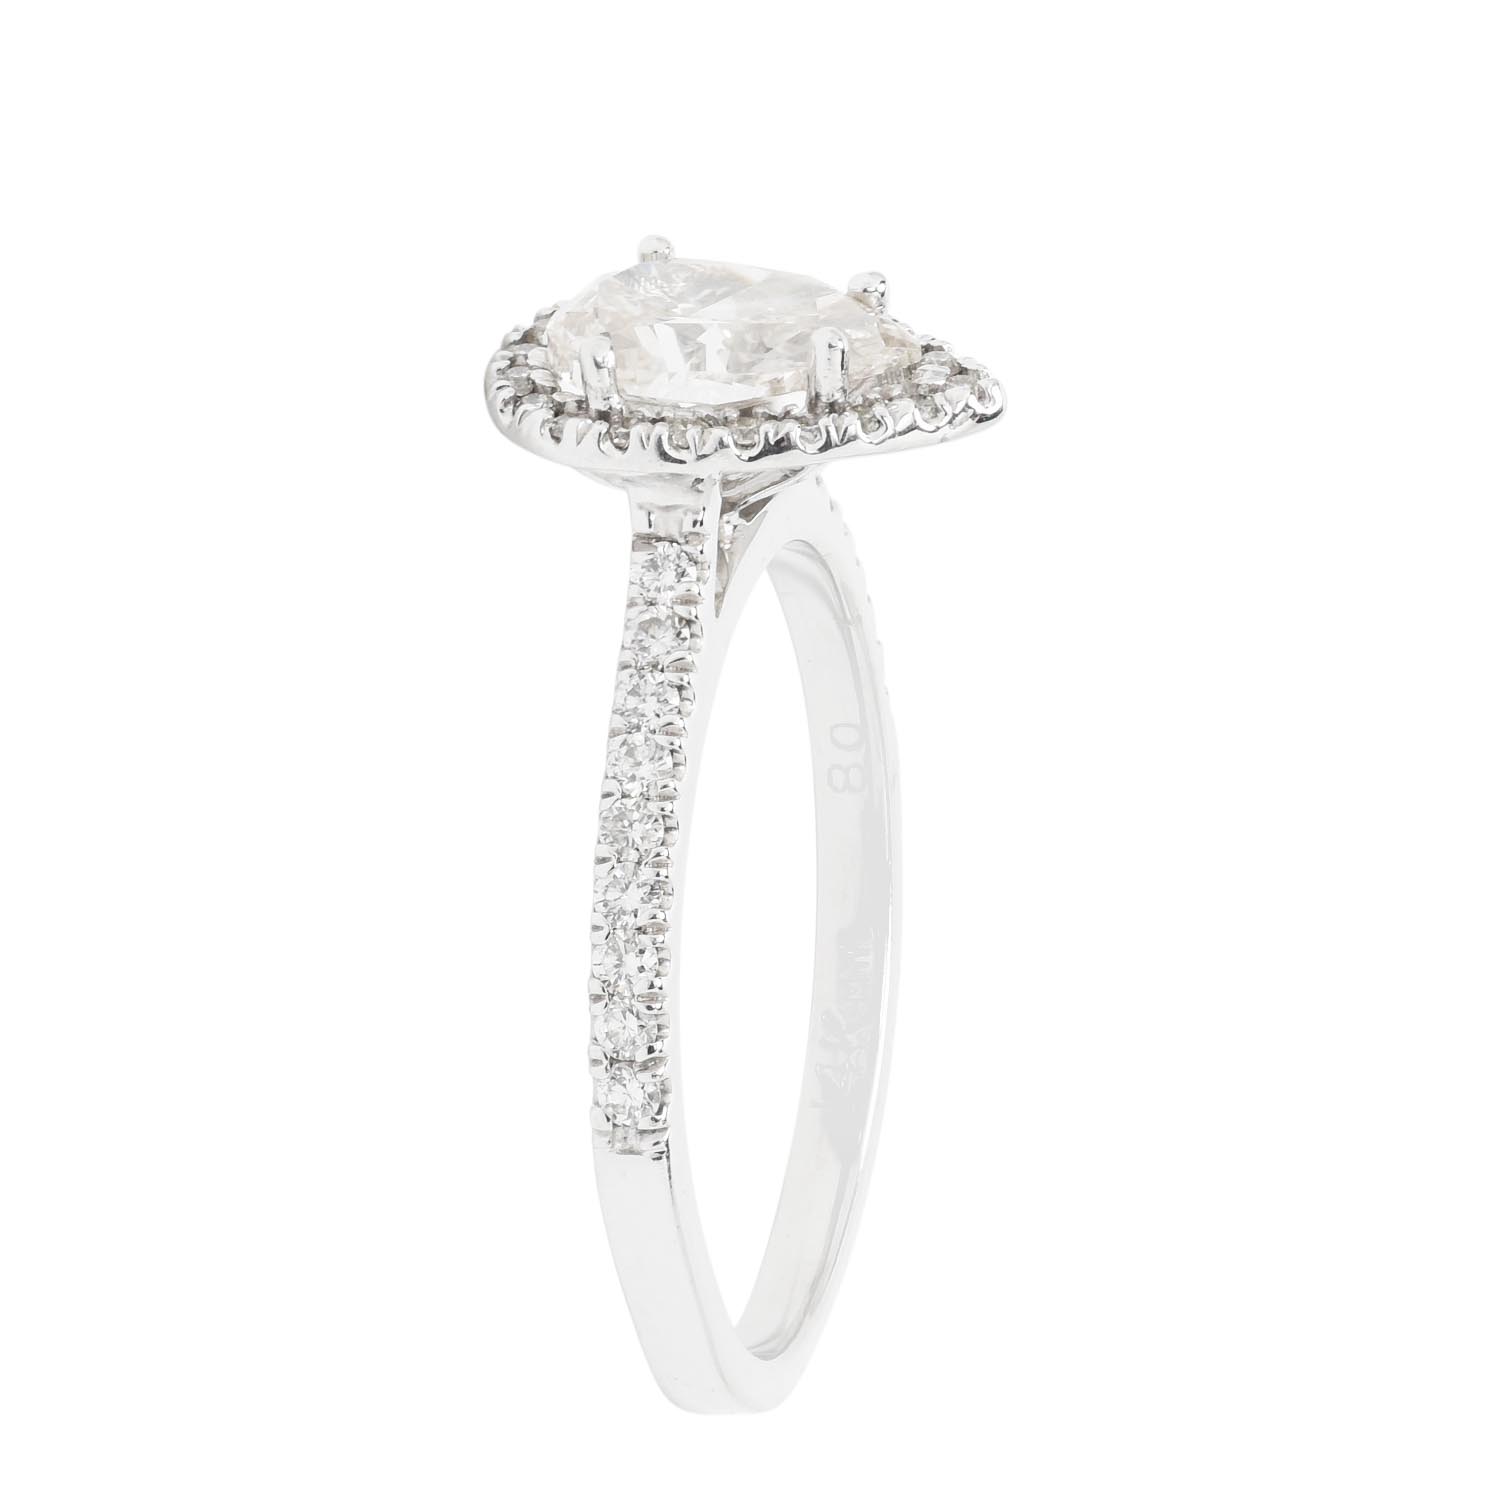 Perla. 1ctw. Pear-Shaped Diamond Halo Engagement Ring in 14K White Gold